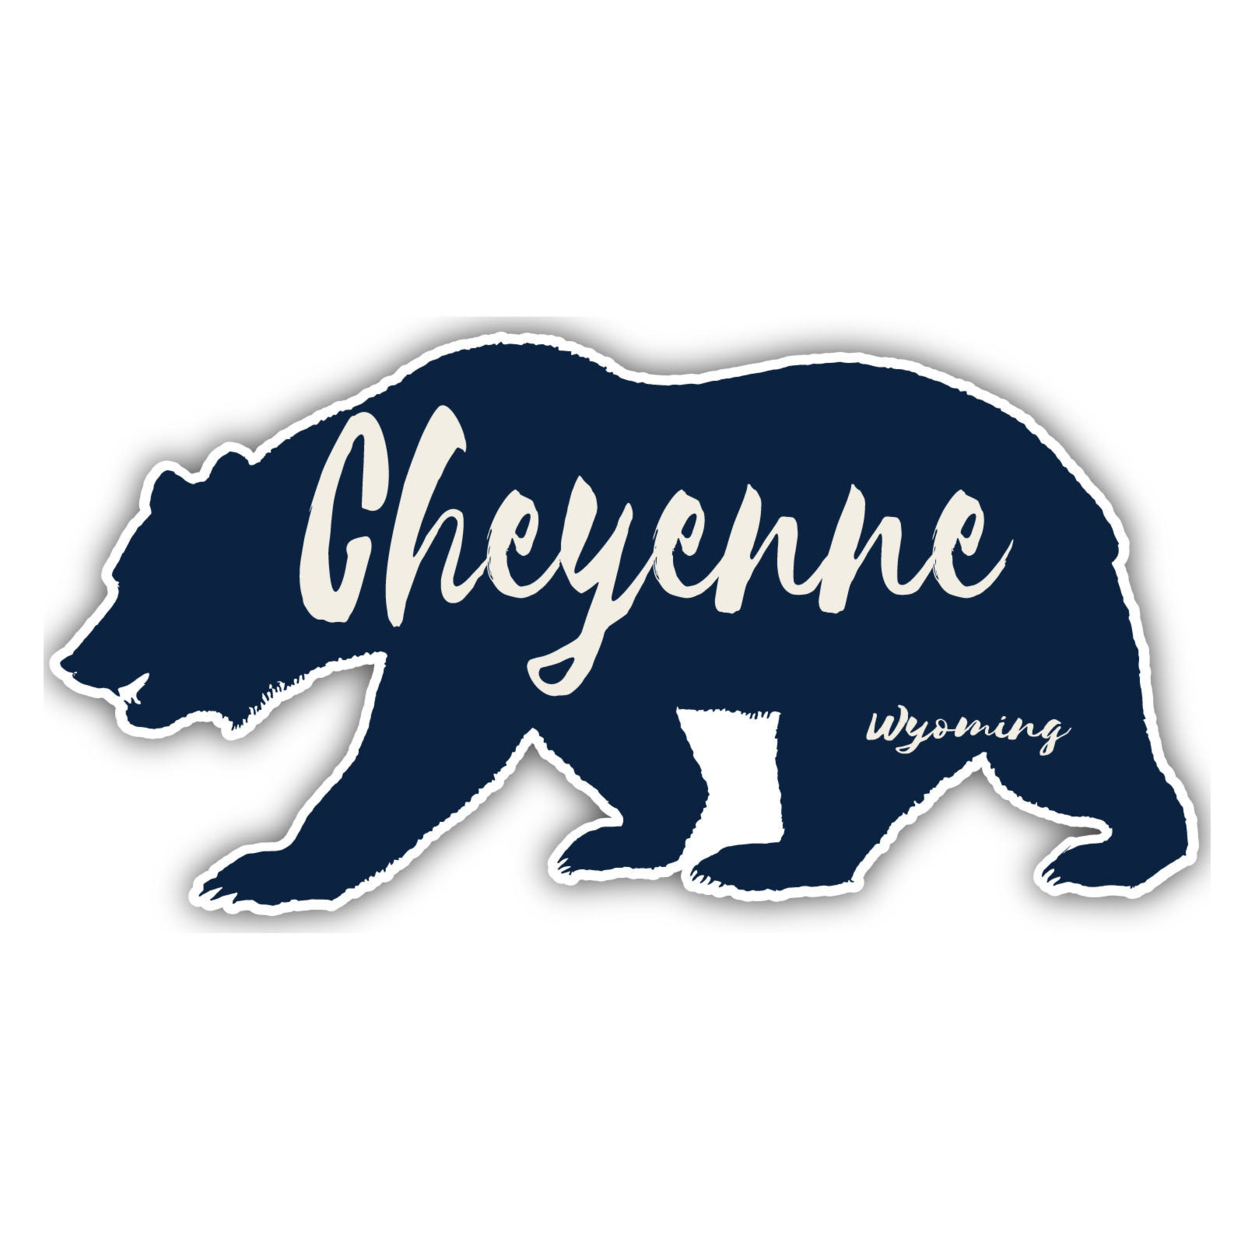 Cheyenne Wyoming Souvenir Decorative Stickers (Choose Theme And Size) - Single Unit, 12-Inch, Camp Life